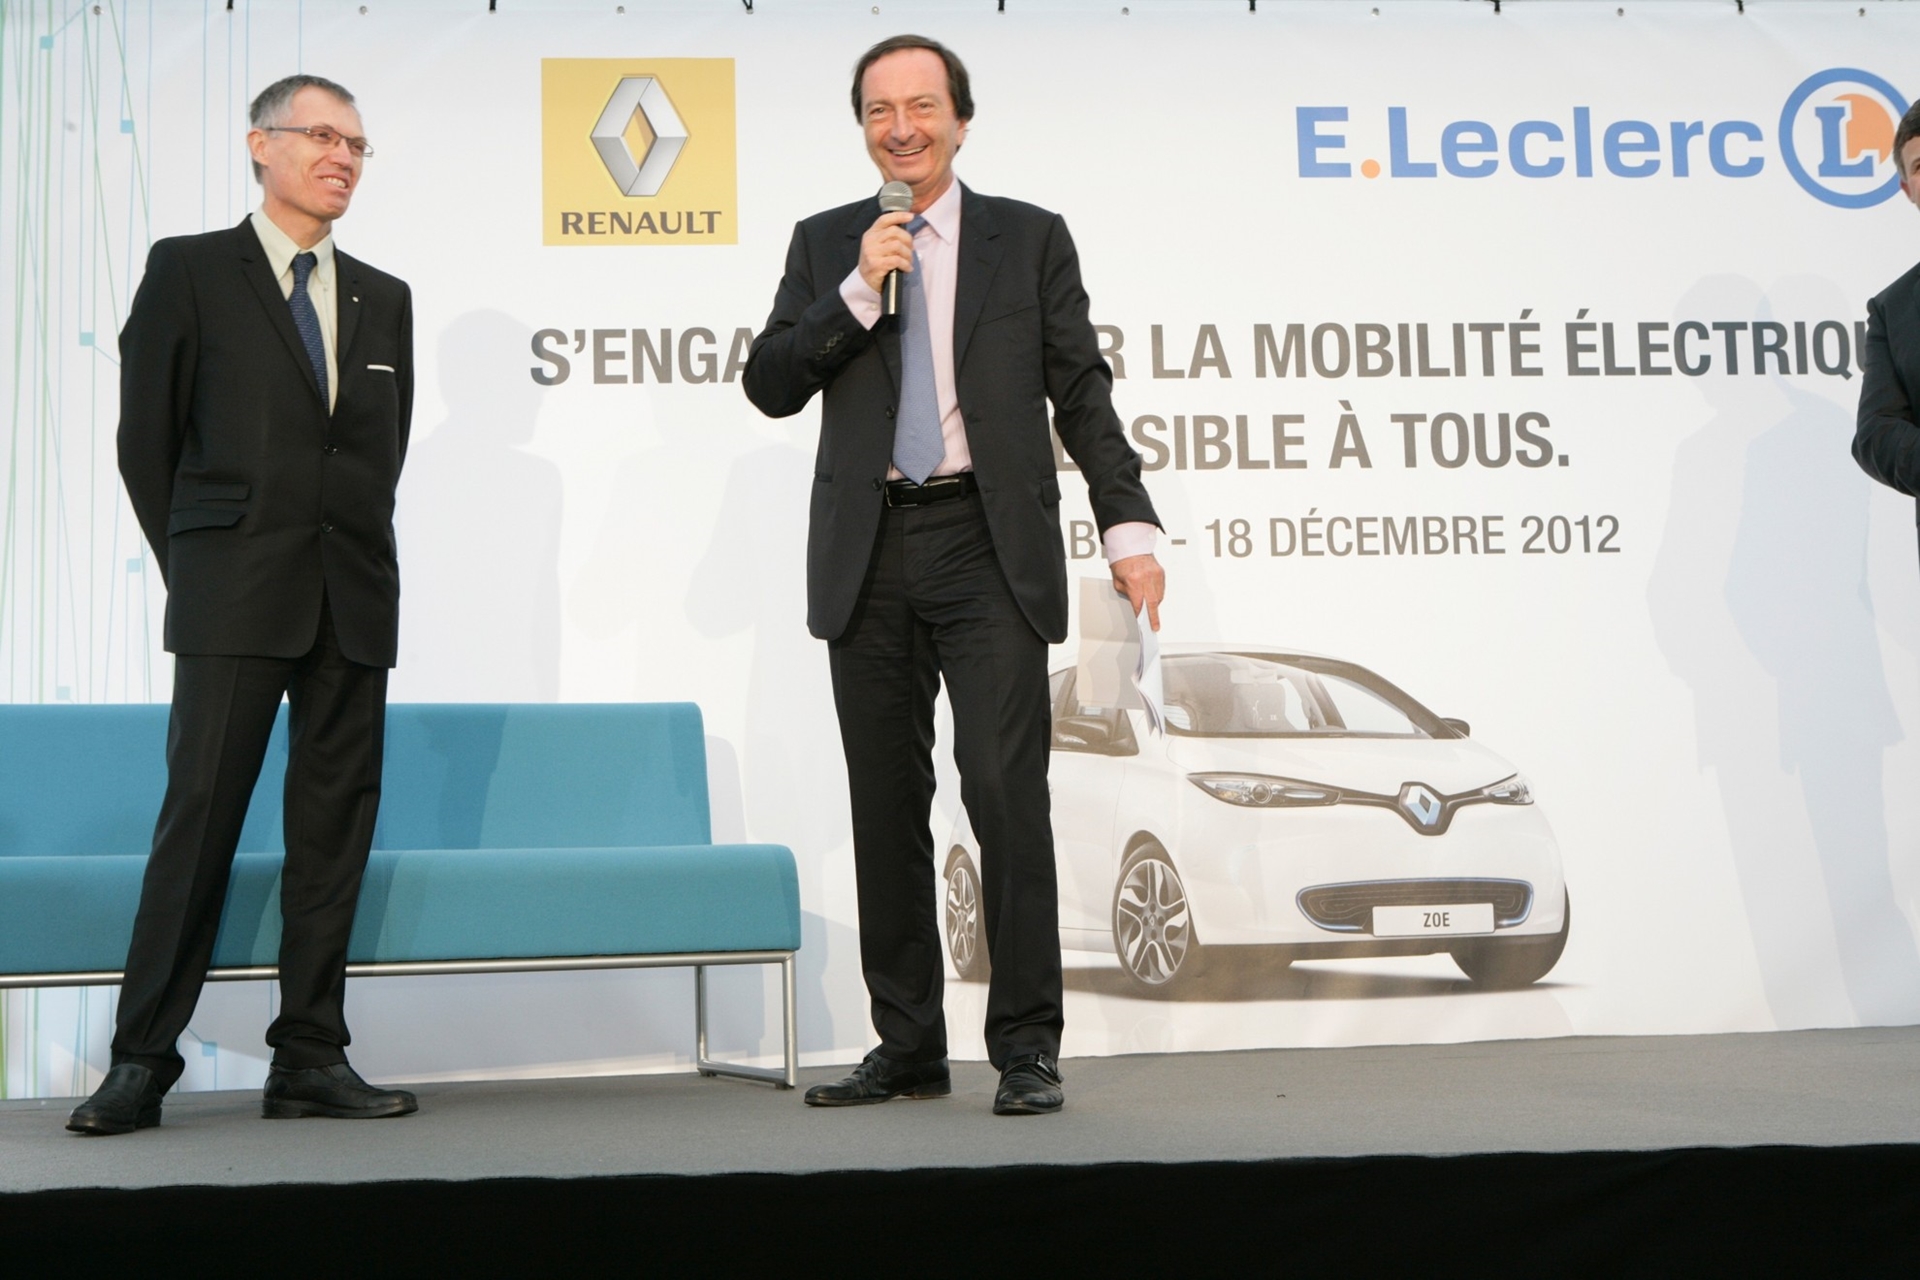 E. Leclerc and Renault take a further step forward in making electric mobility available to everybody